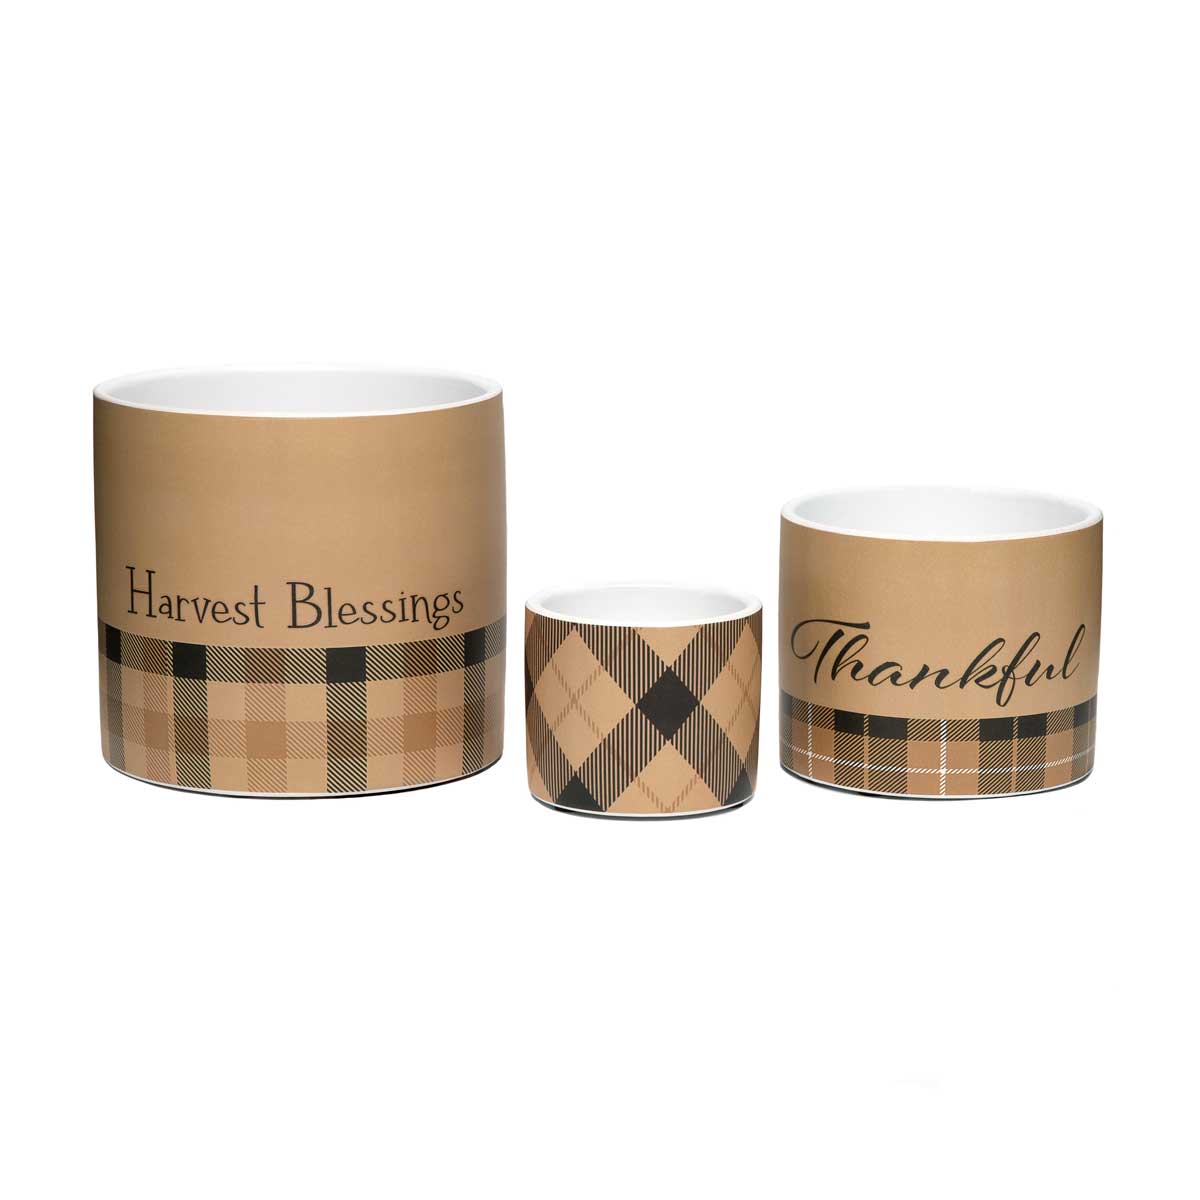 POT HARVEST BLESSINGS PLAID LARGE 5.25IN X 4.75IN BROWN/BLACK CE